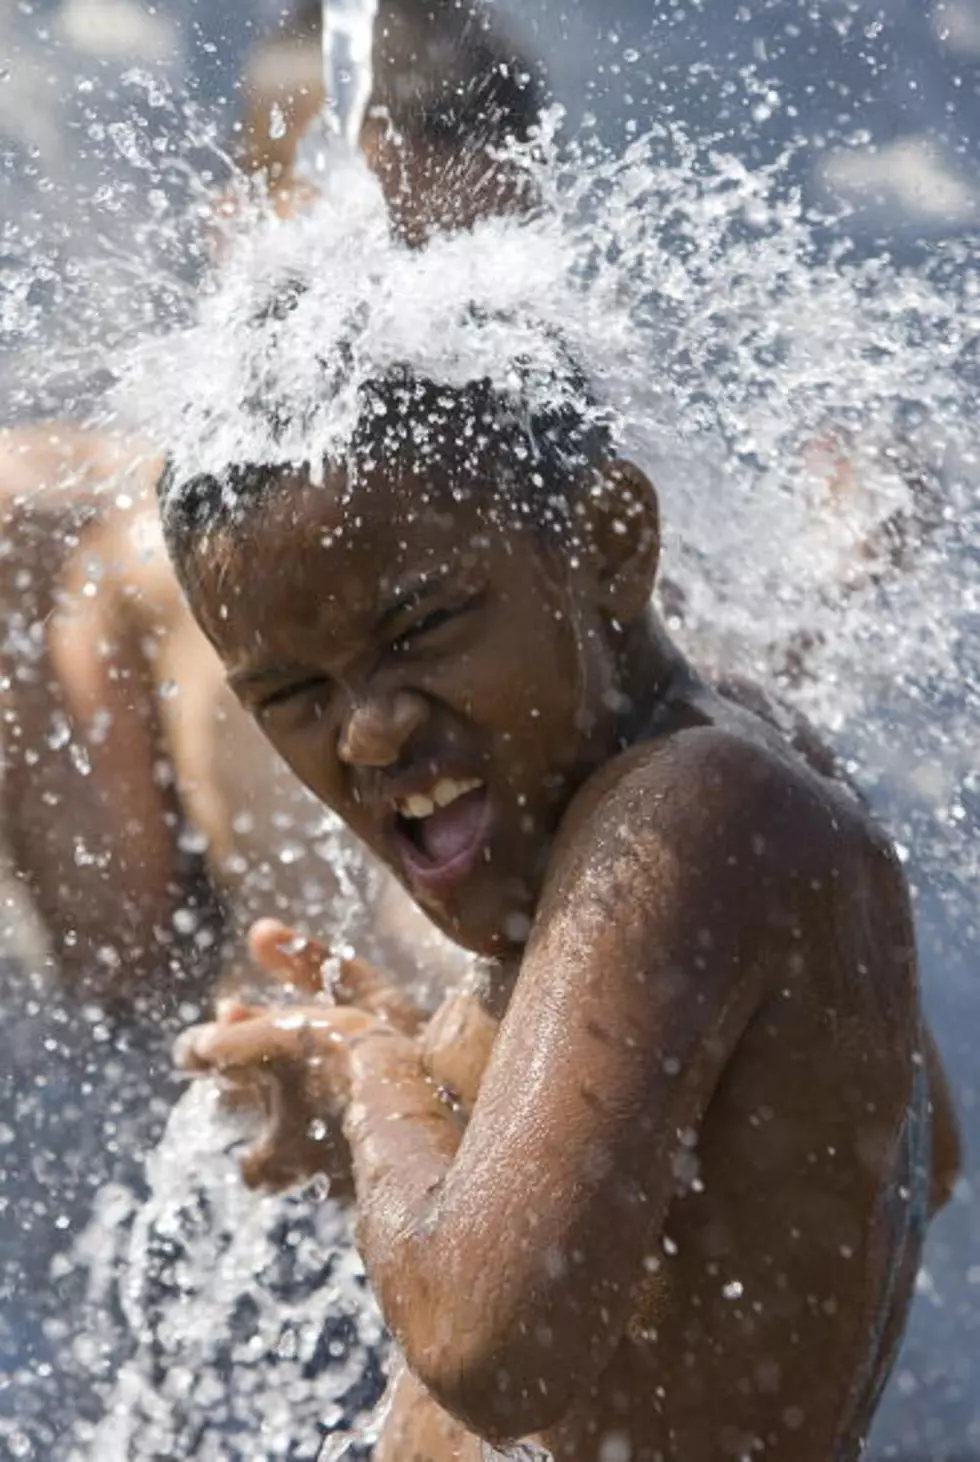 Heatwave Kills At Least 22 People; Grand Rapids, Don’t Become A Statistic